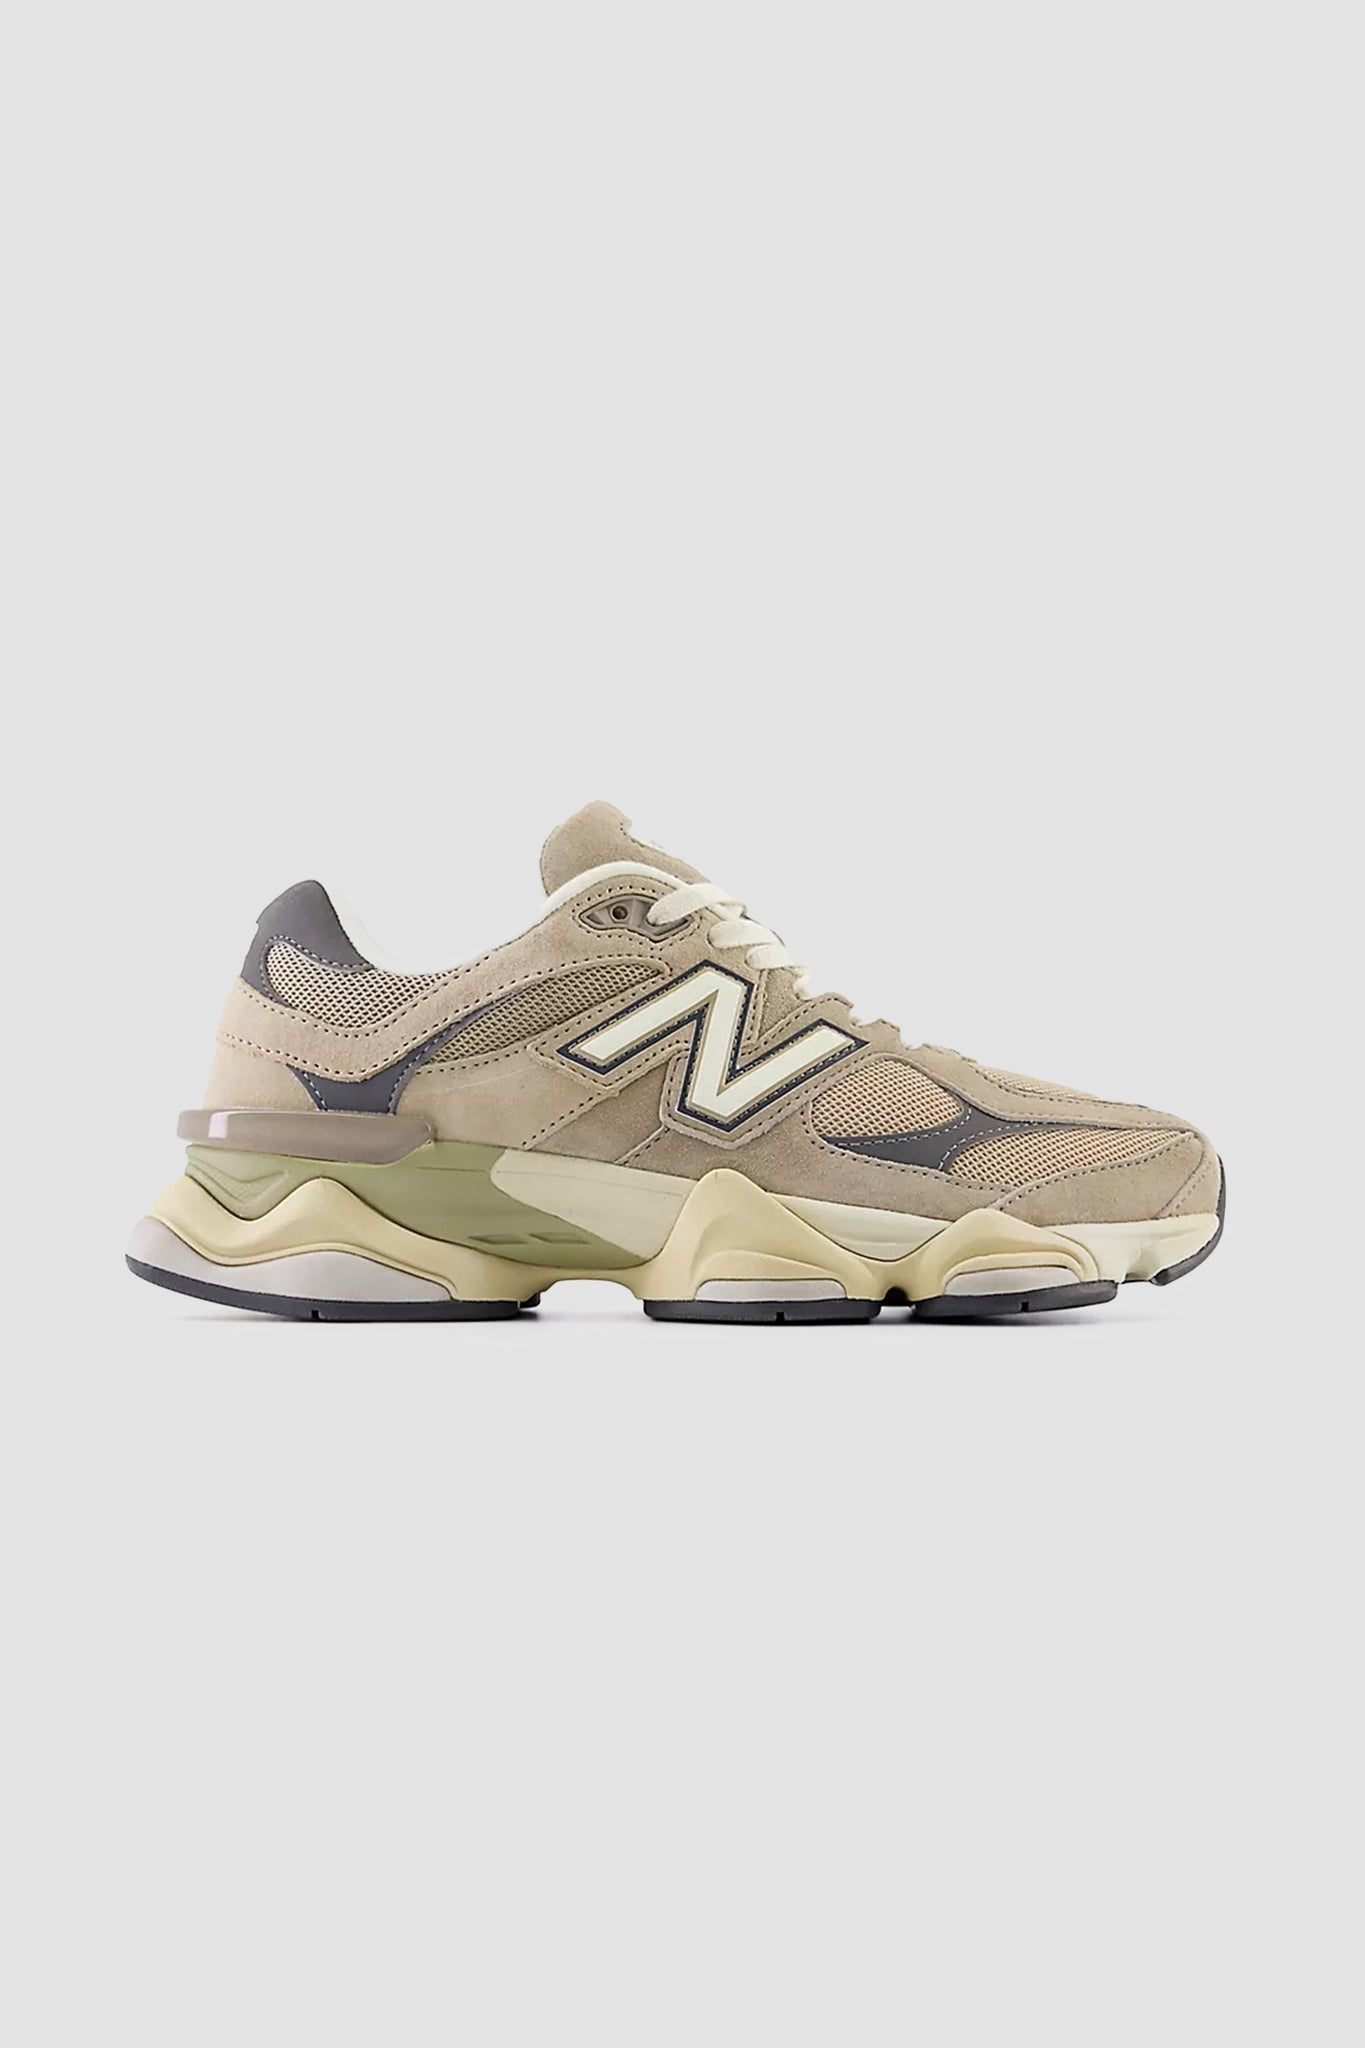 New Balance Unisex 9060 Sneaker in Driftwood with Mindful Grey and Castlerock